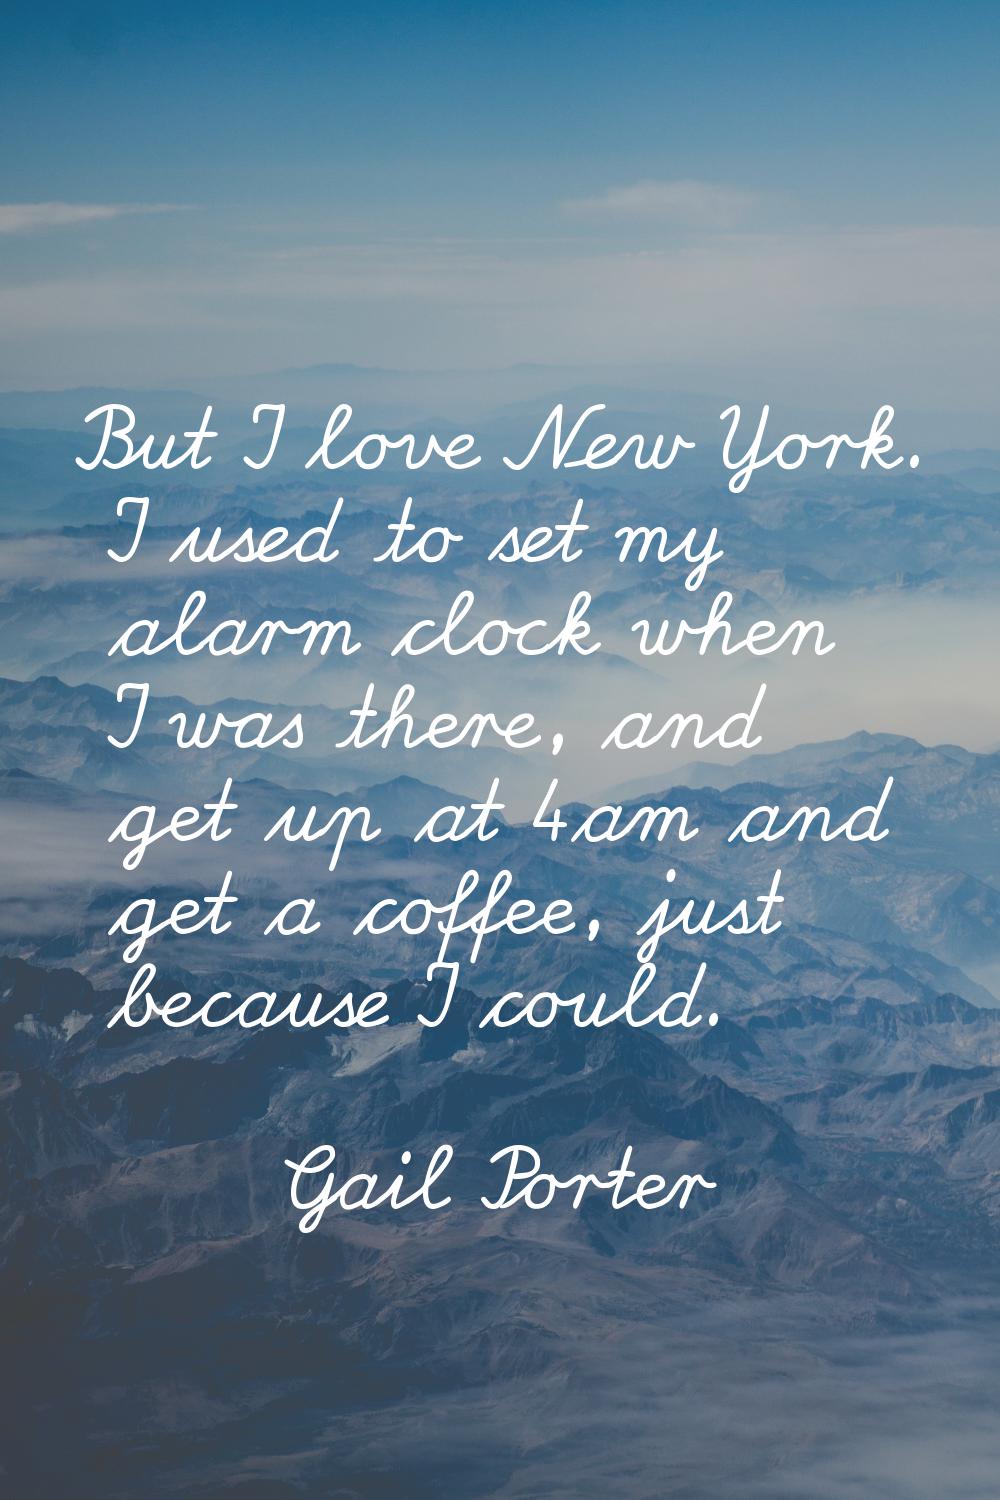 But I love New York. I used to set my alarm clock when I was there, and get up at 4am and get a cof